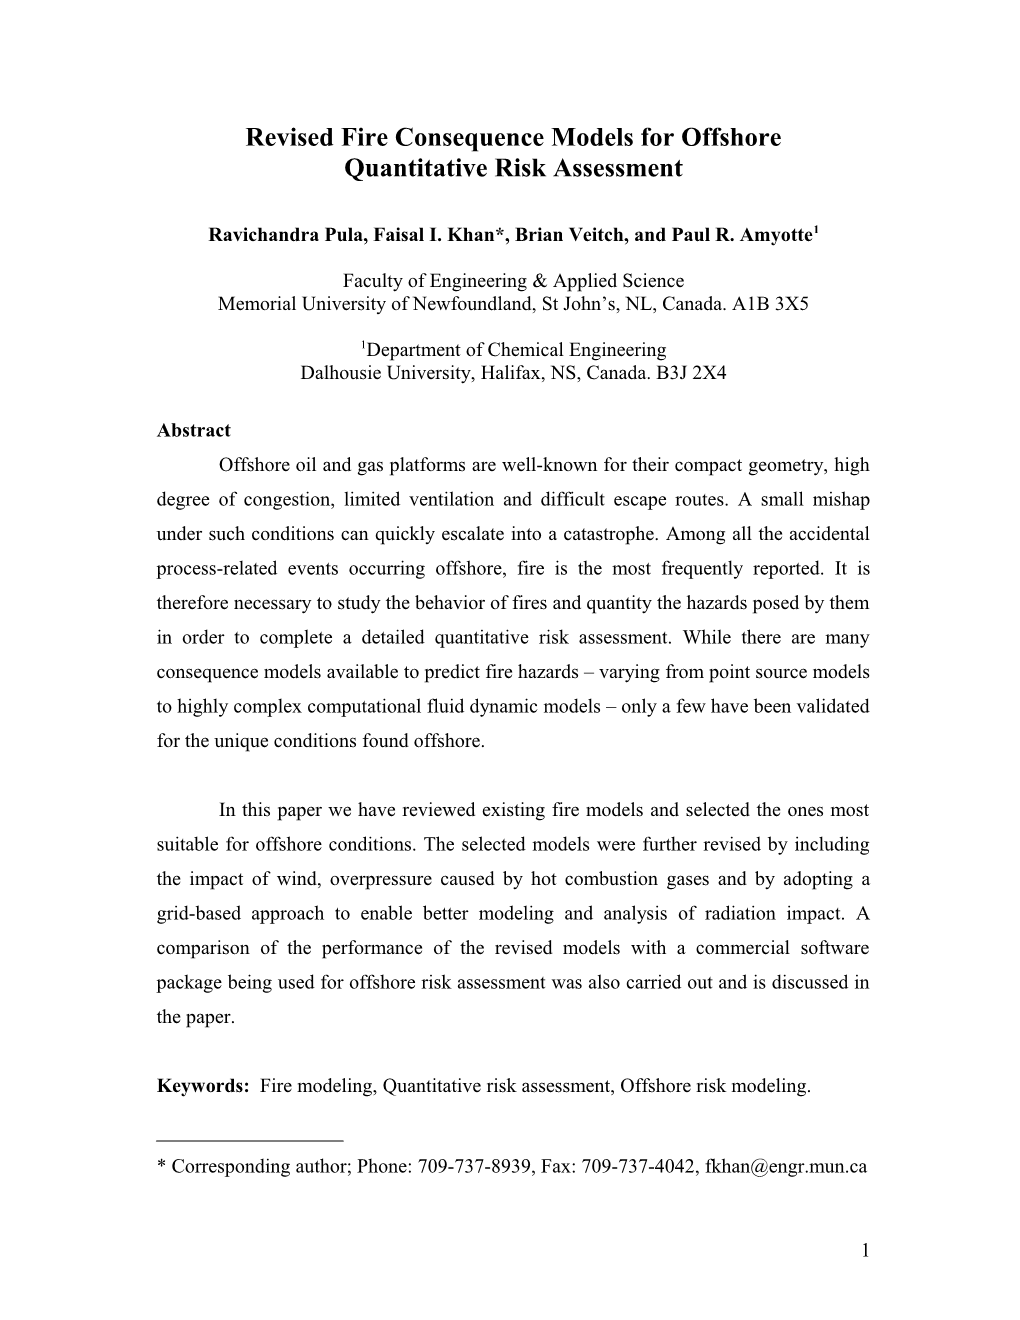 Revised Fire Consequence Models for Offshore Quantitative Risk Assessment